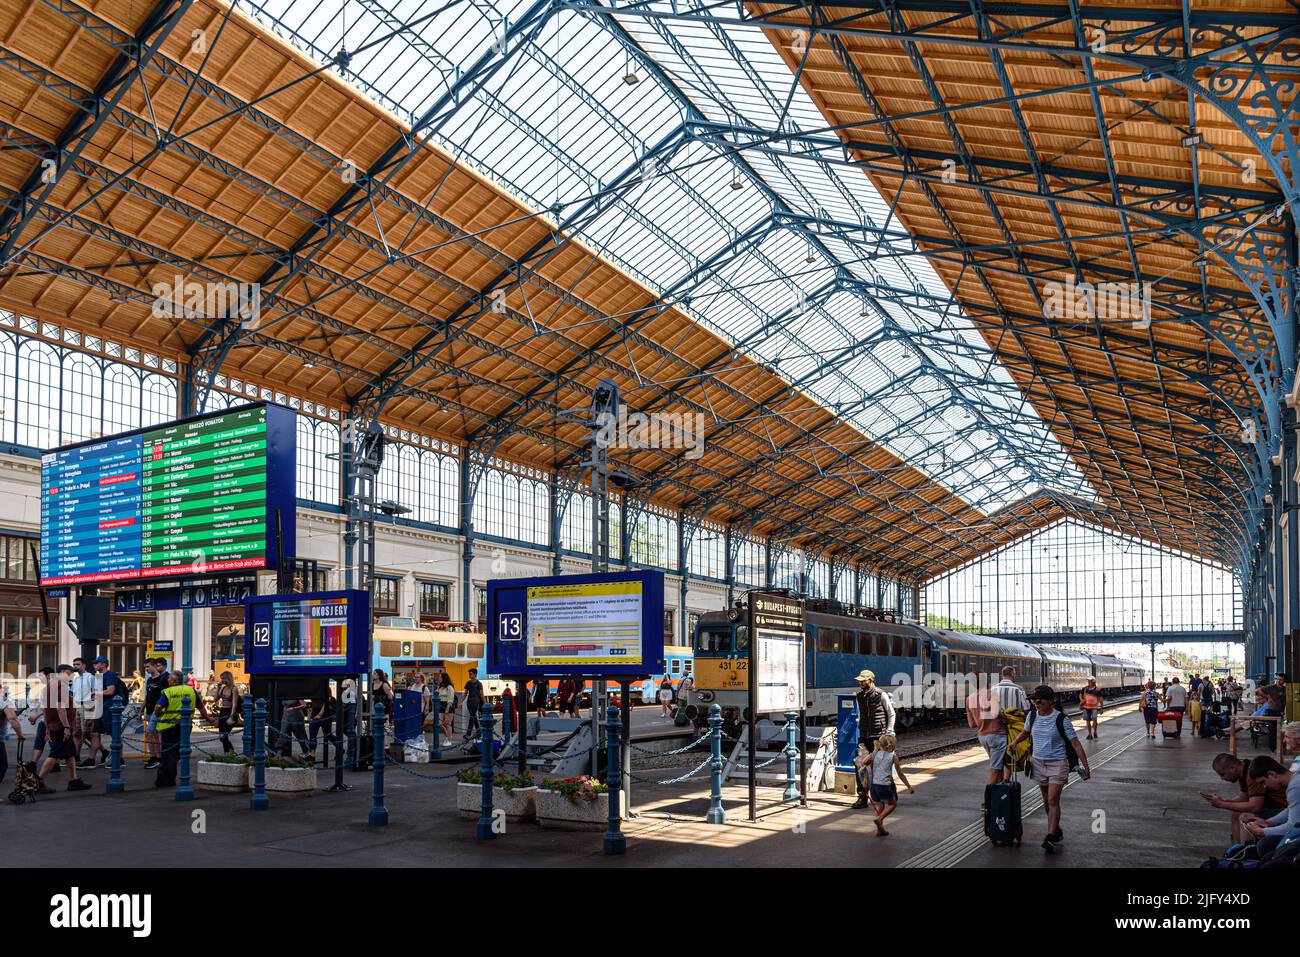 Commuters coming and going inside the Nyugati Railway Station in Budapest, Hungary Stock Photo